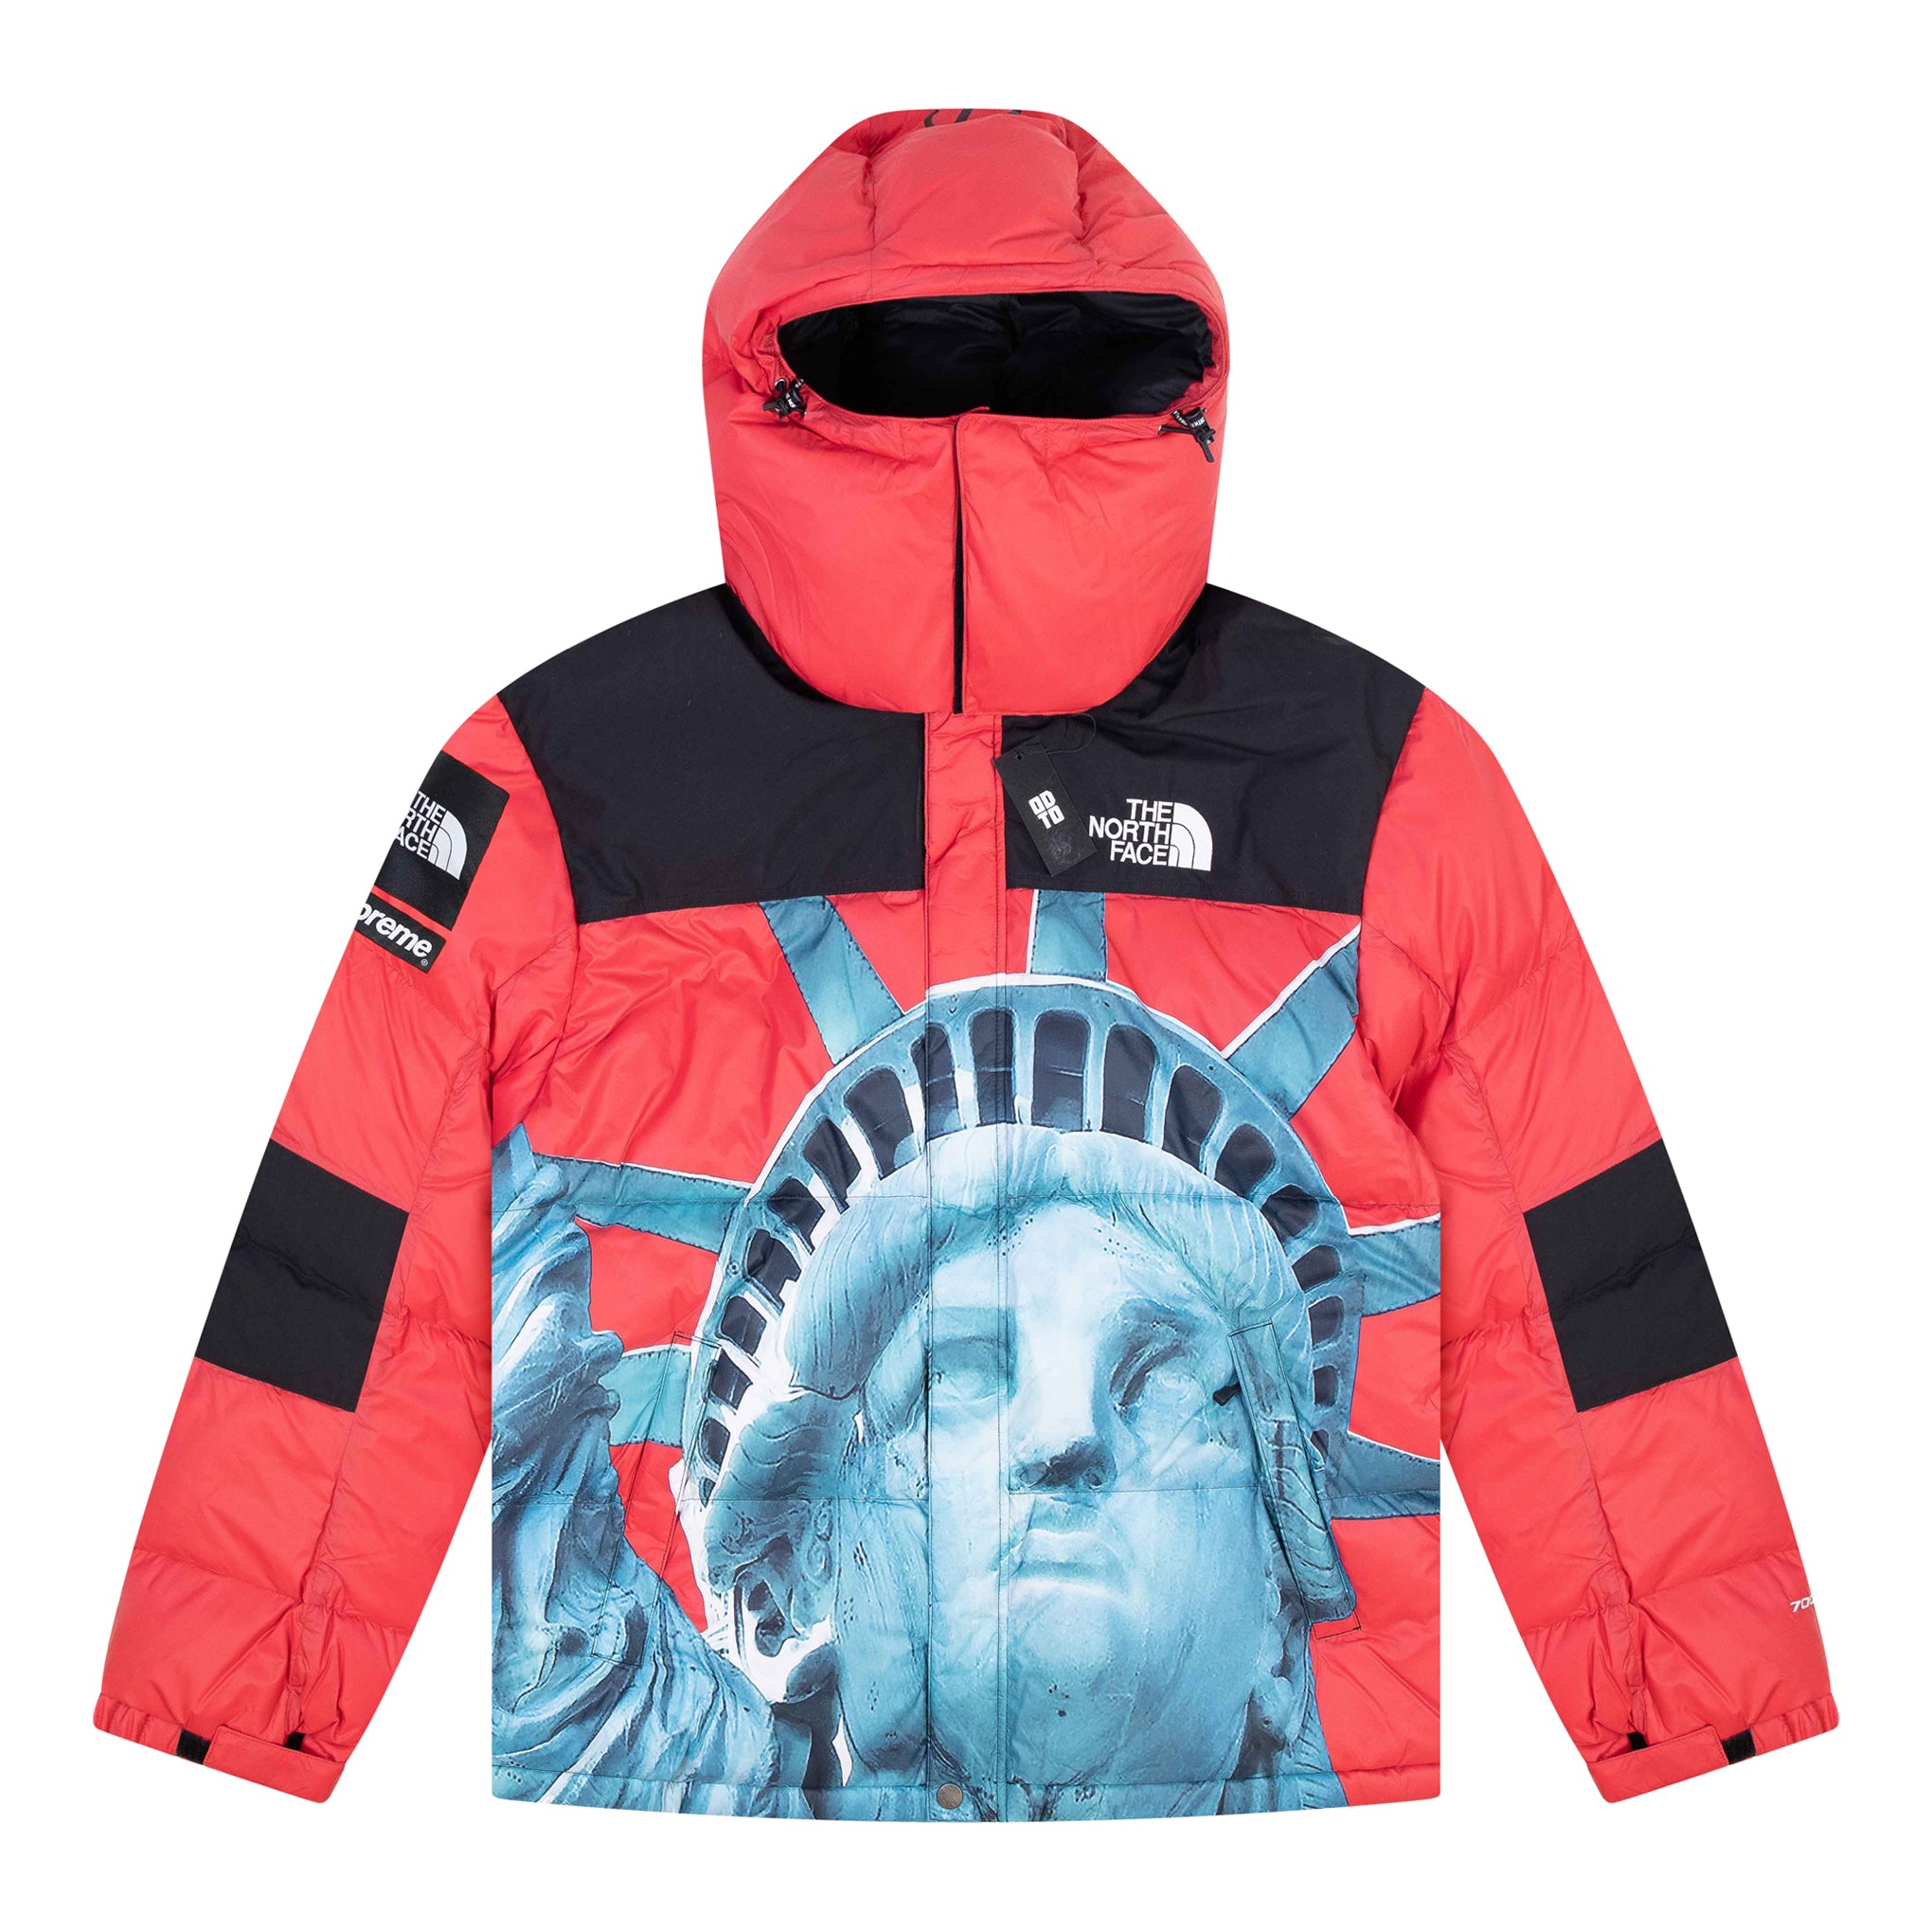 SUPREME THE NORTH FACE STATUE OF LIBERTY BALTORO JACKET RED